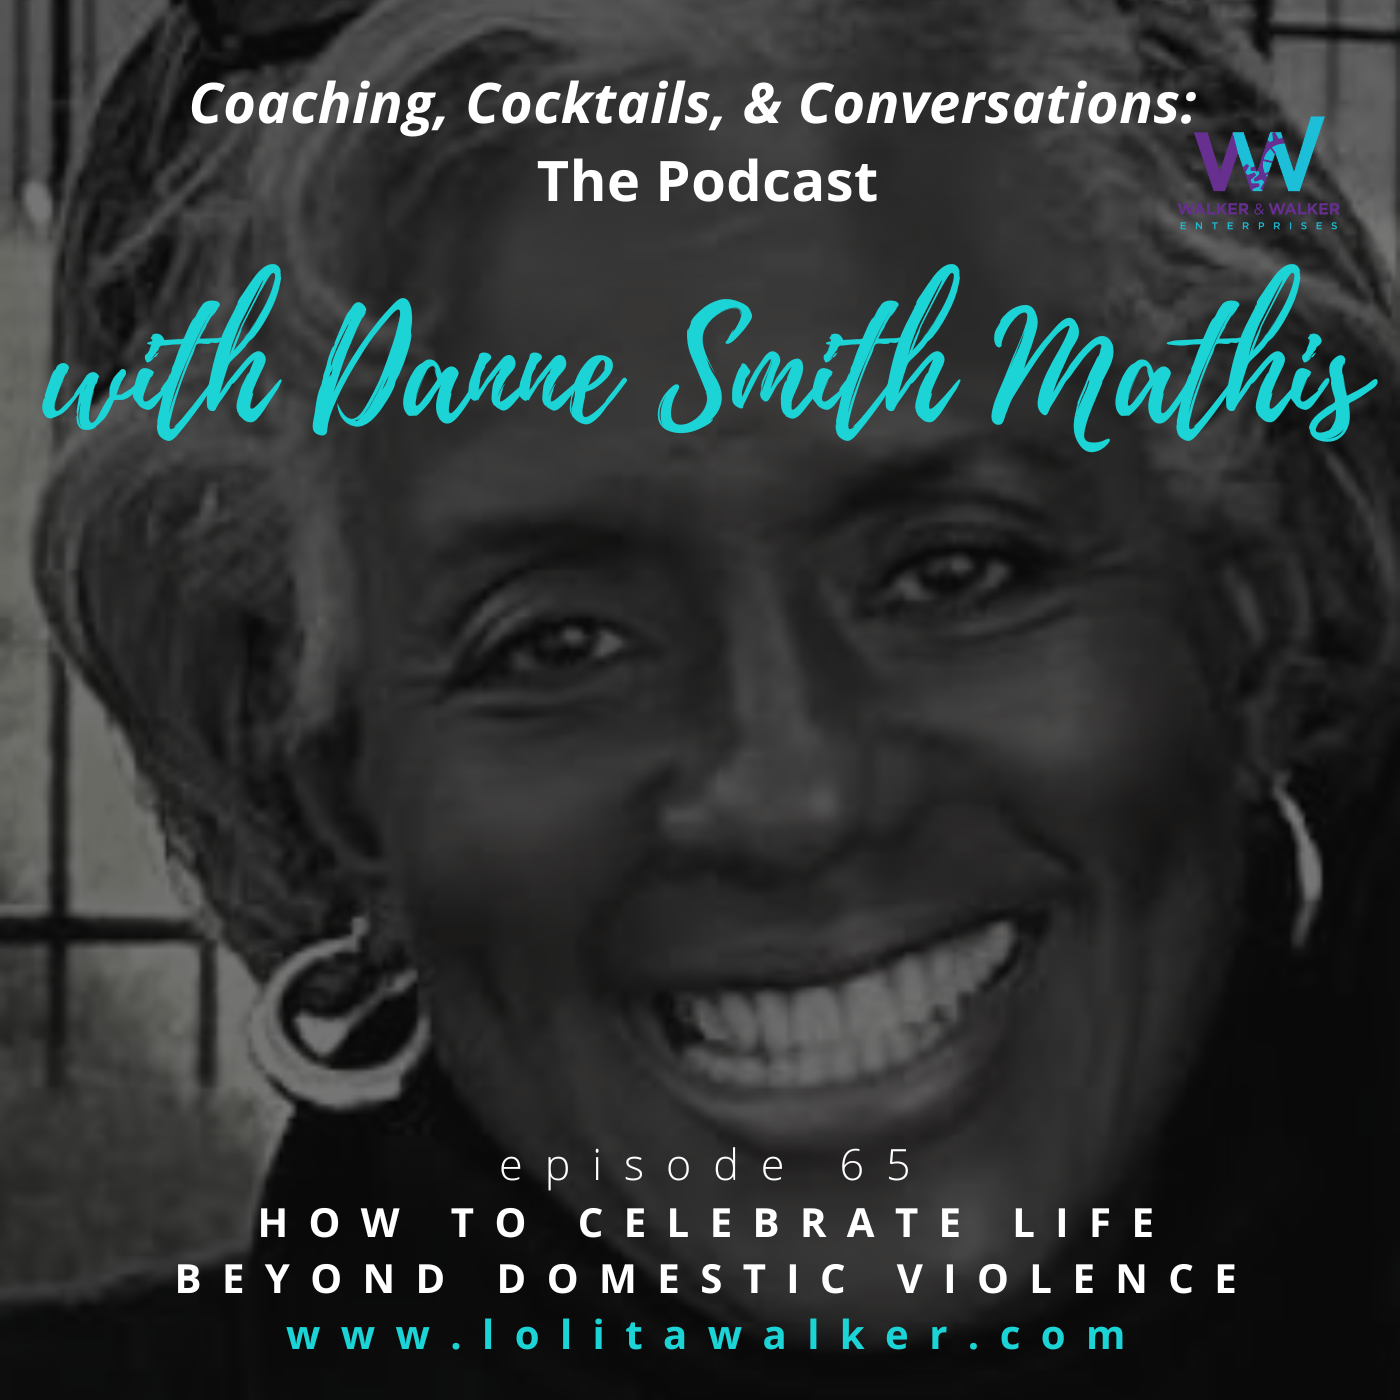 S365 - How to Celebrate Life Beyond Domestic Violence (with Danne Smith Mathis)